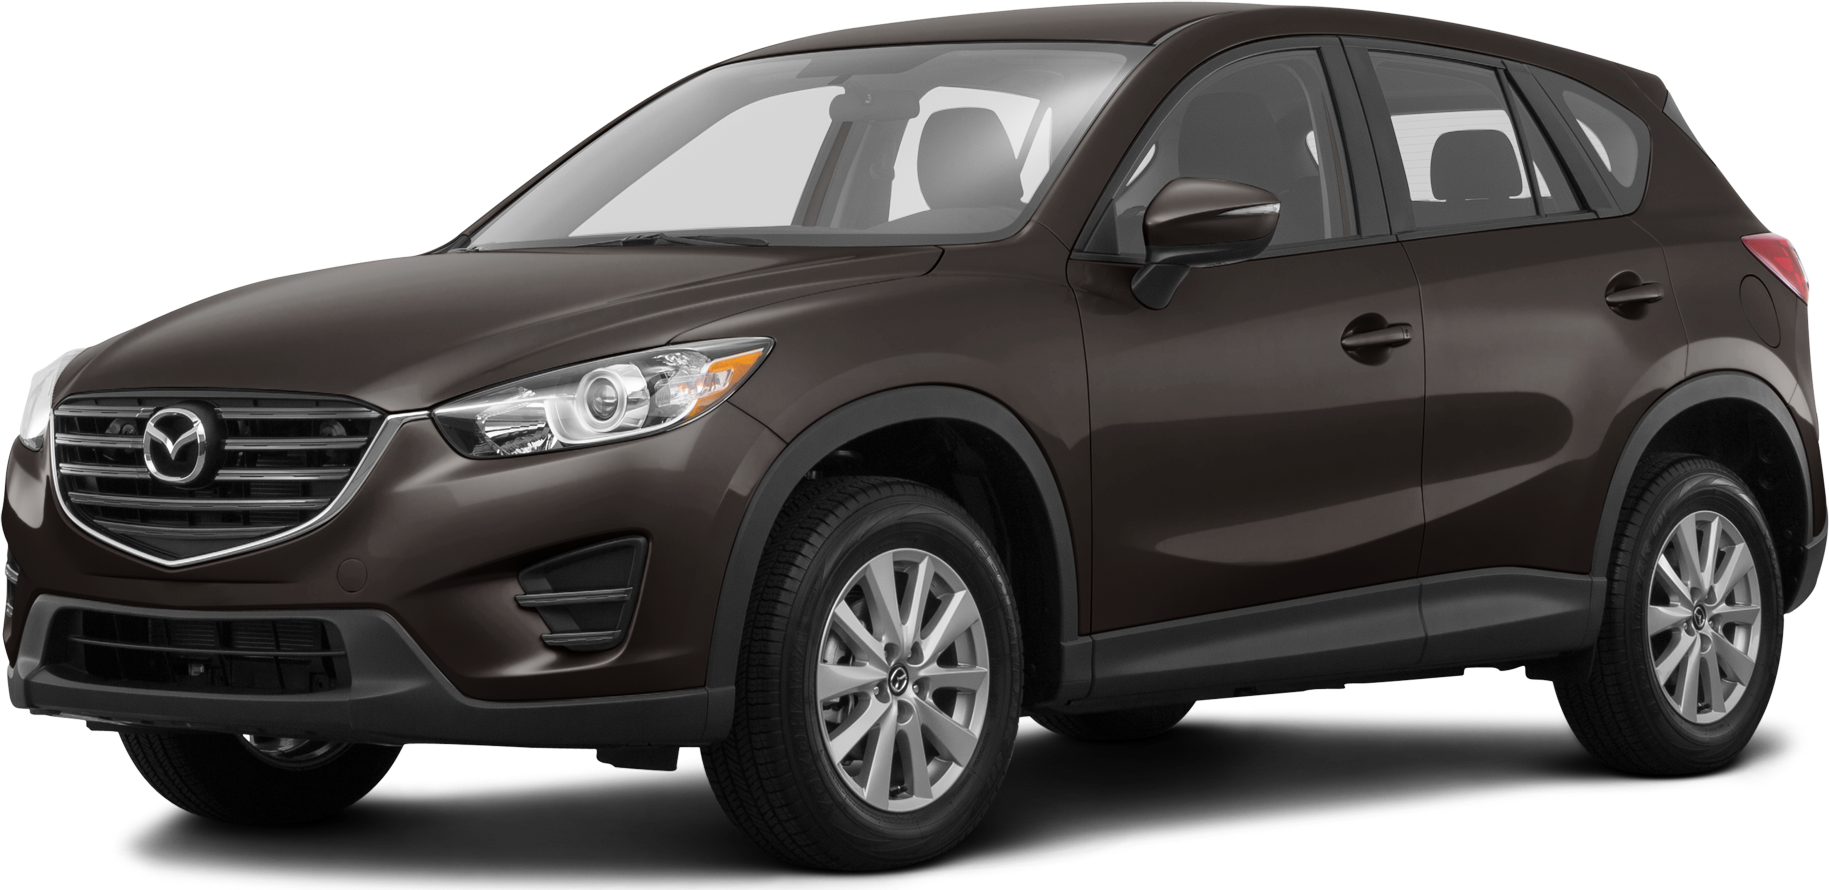 Used 2016 Mazda Cx 5 Values Cars For Sale Kelley Blue Book